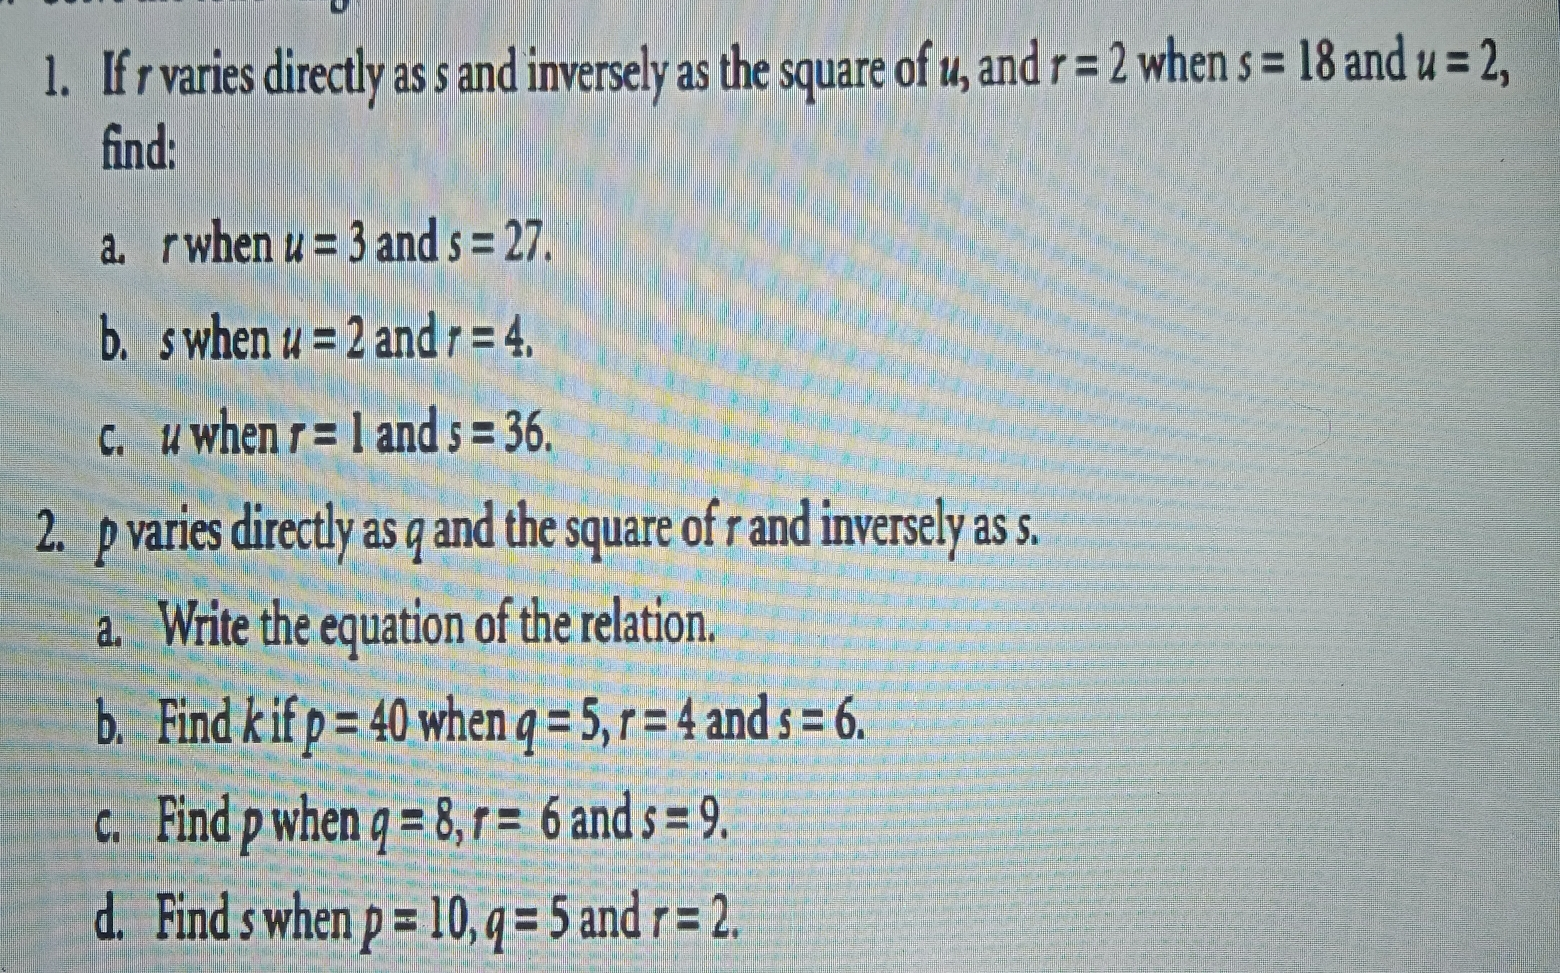 1. If r varies directly as s and inversely as the square of u_, and r=2 when s=18 and u=2 find:: a. rwhen u=3 and s=27 b.swhen u=2 and r=4 c.uwhen r=1 and s=36 2. p varies directly as q and the square of r and inversely as s.. a. Write the equation of the relation.. b. Find k if p=40 when q=5 r=4 and s=6 c. Find p when q=8 r= 6 and s=9 d. Find s when p=10 q=5 and r=2